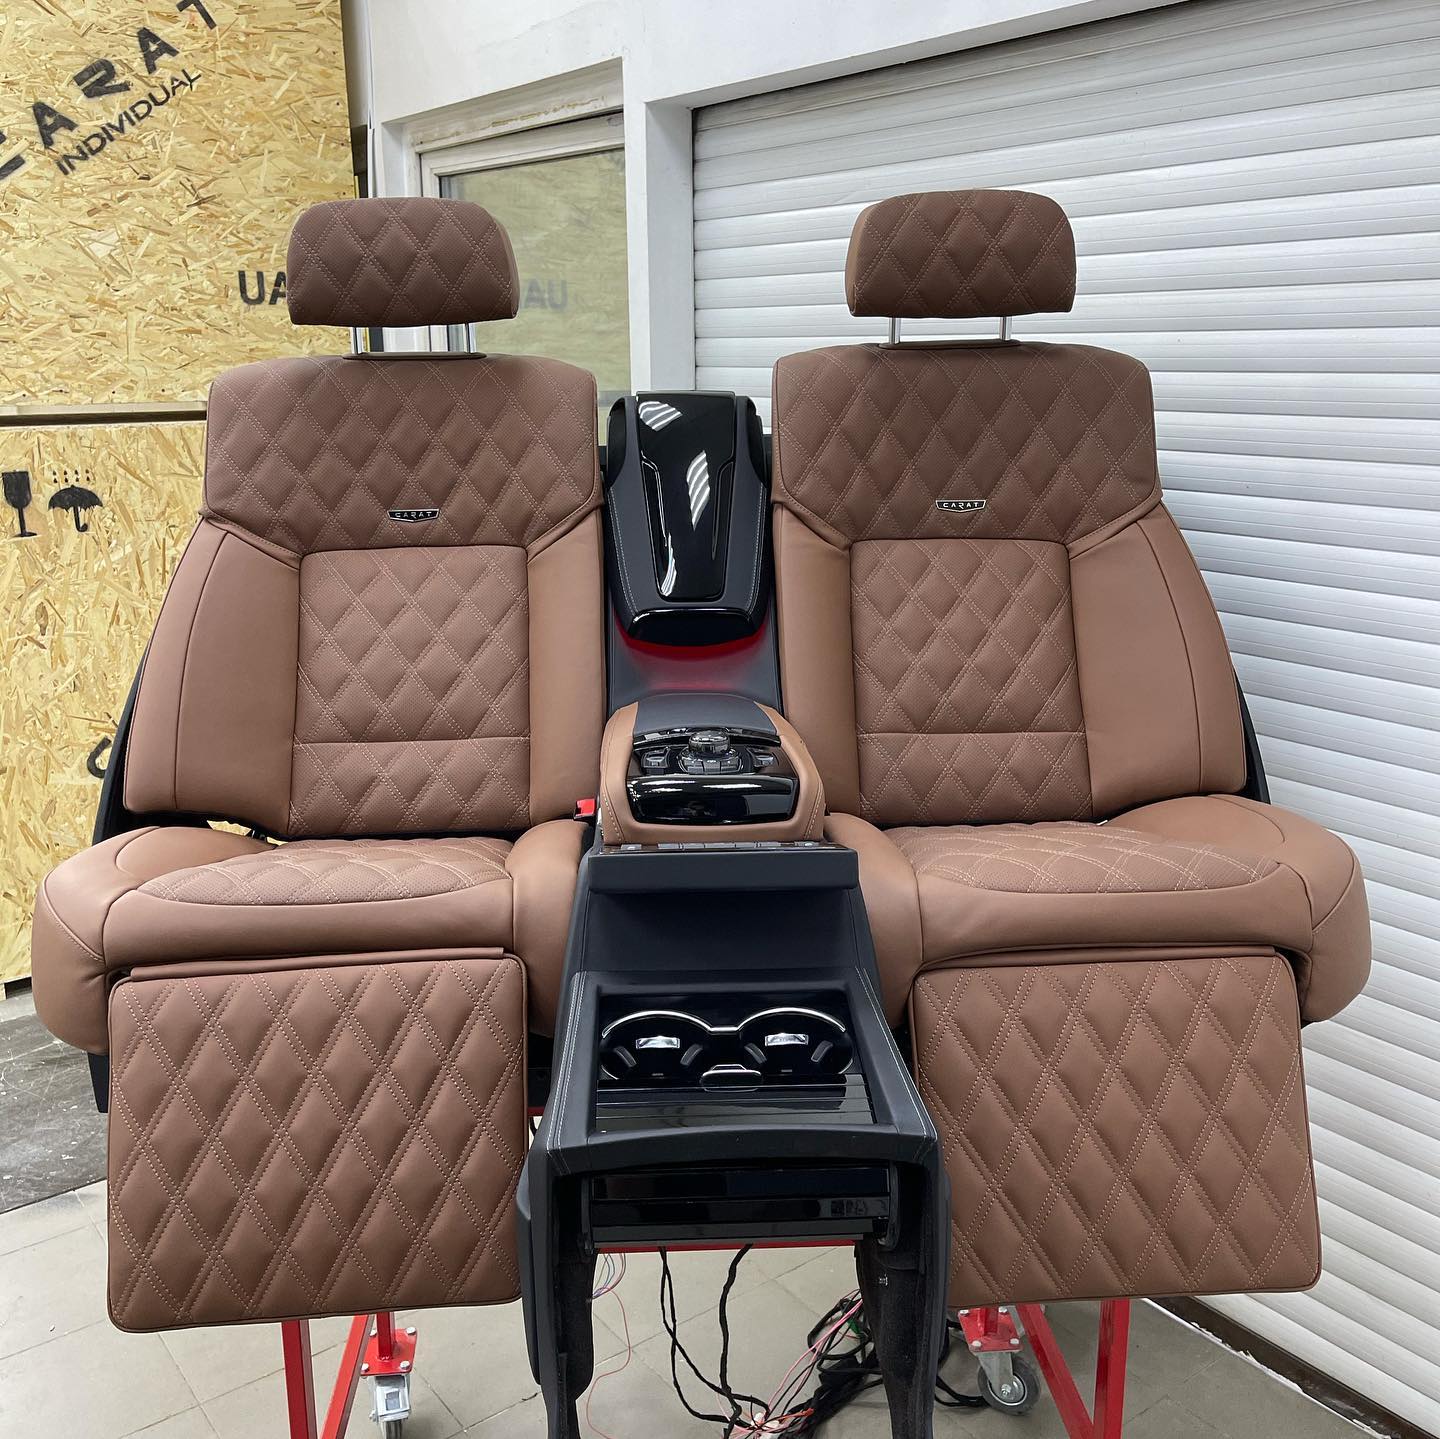 Check price and buy Carat seats set for Toyota Land Cruiser 200 Restyling 2